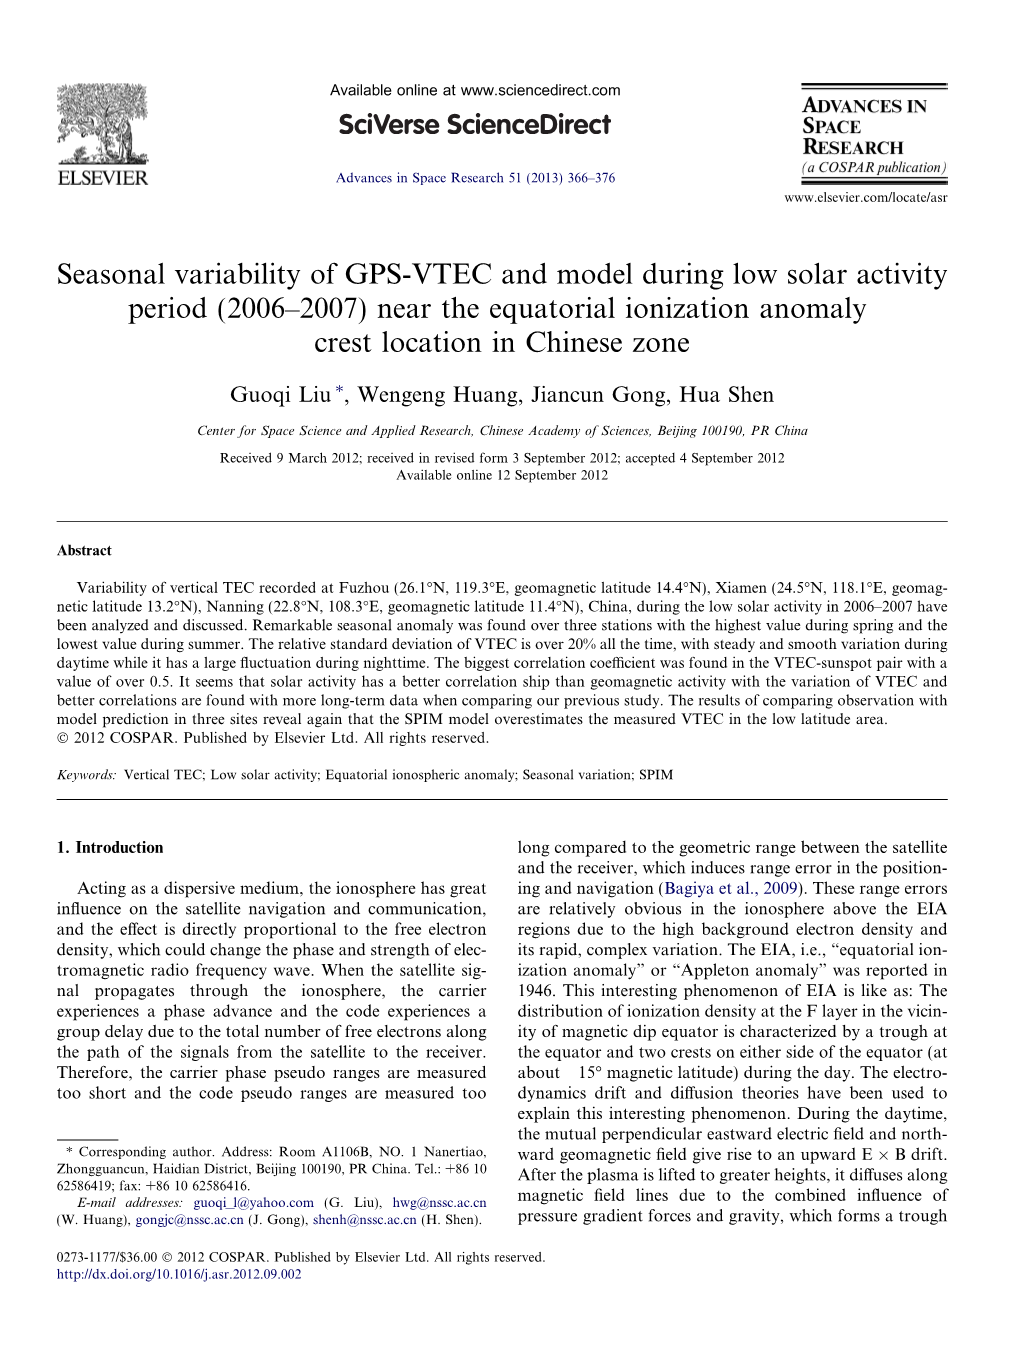 Seasonal Variability of GPS-VTEC and Model During Low Solar Activity Period (2006–2007) Near the Equatorial Ionization Anomaly Crest Location in Chinese Zone